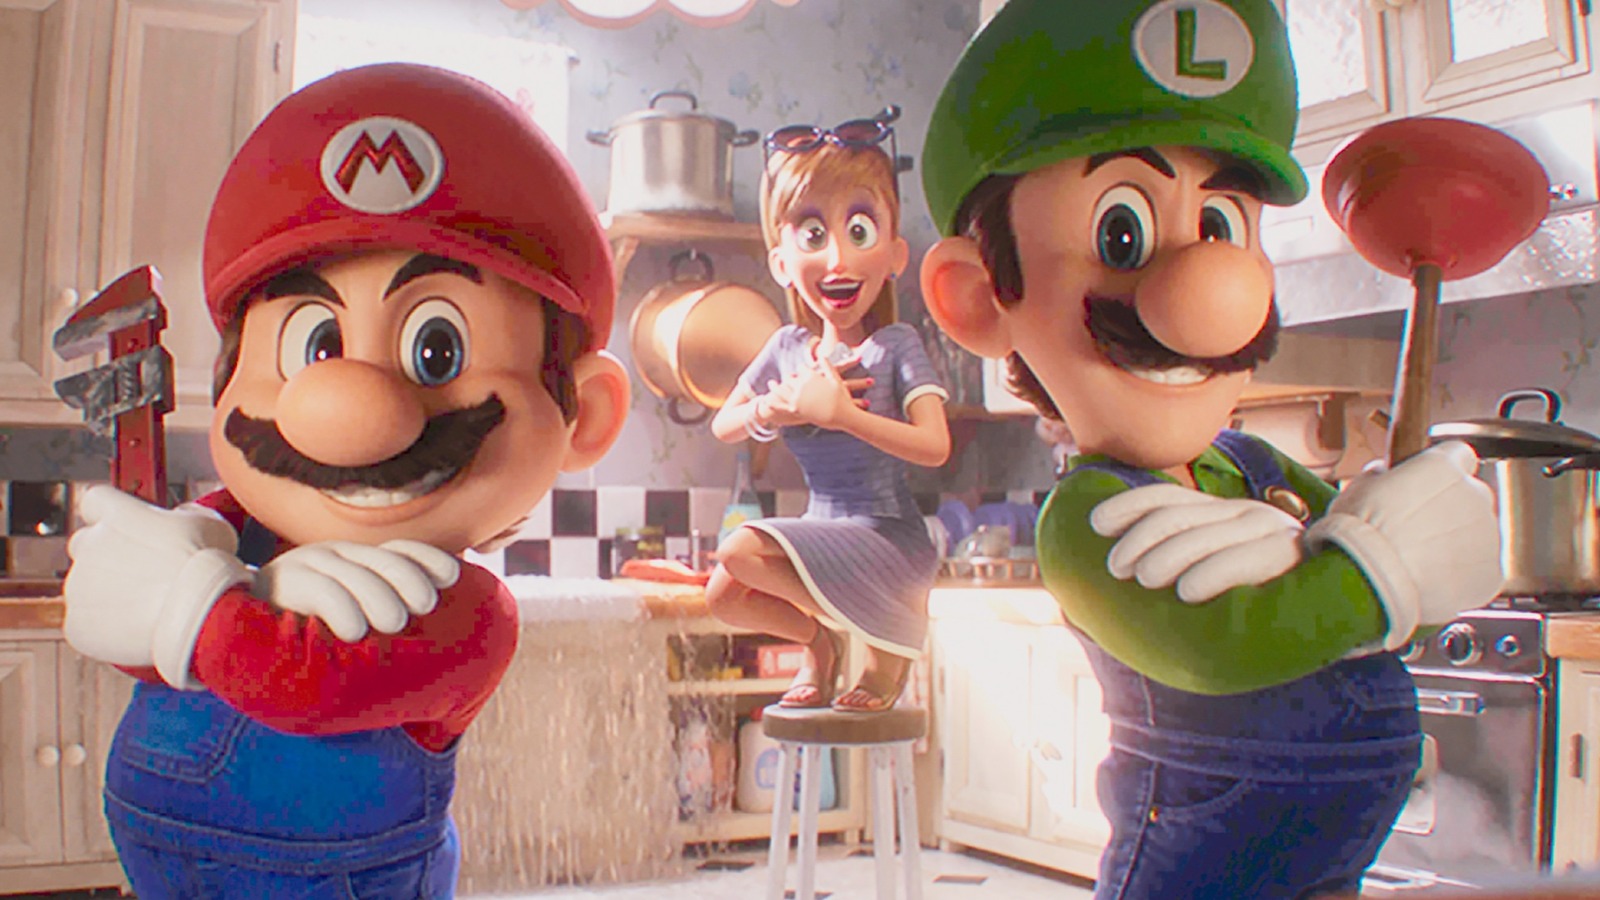 The Super Mario Bros. Movie' Review: A Perfect Capture of the Game